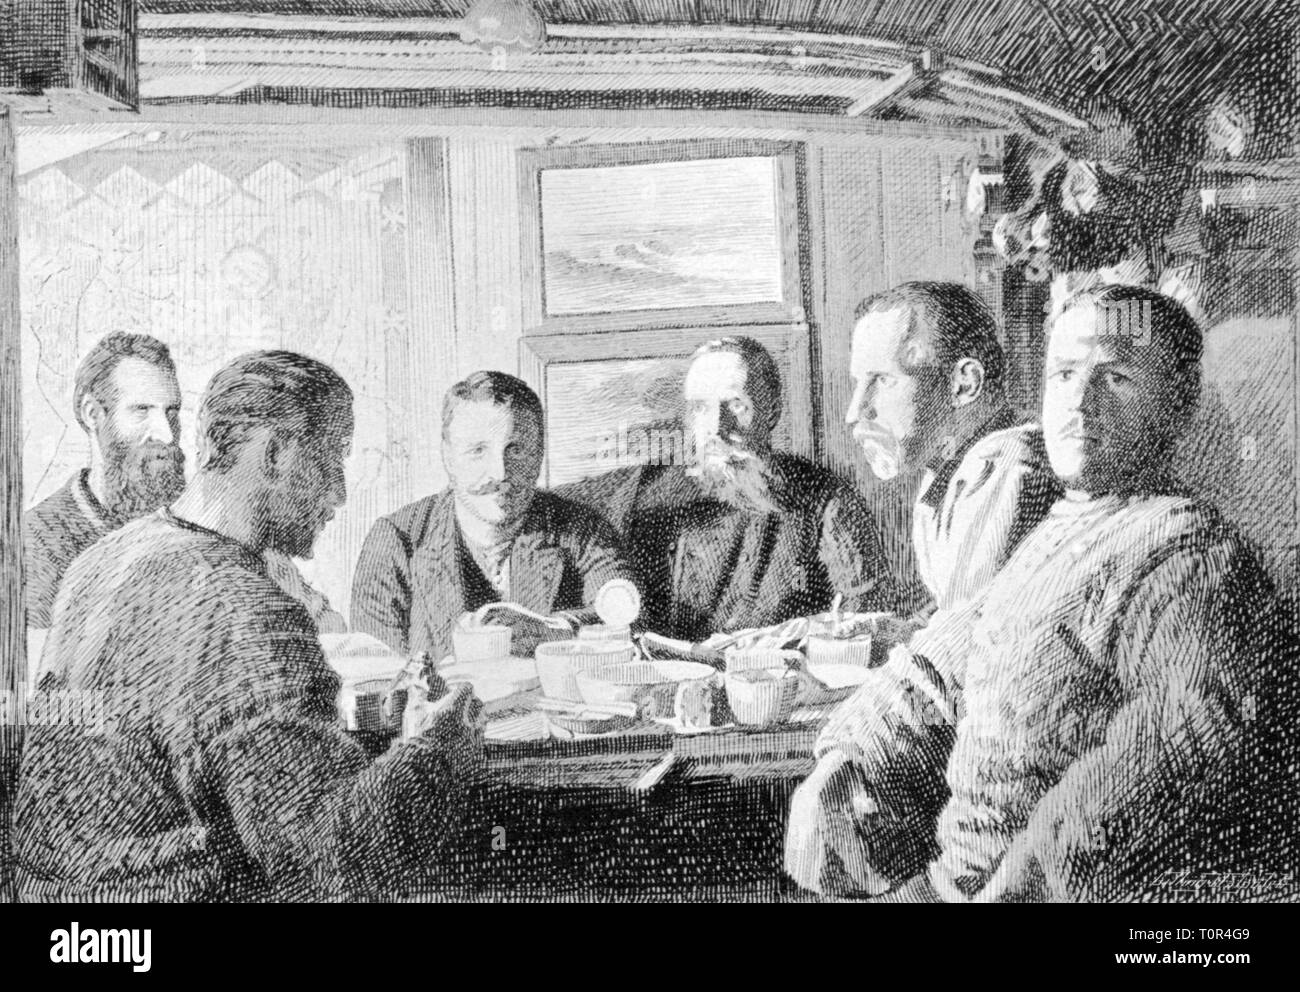 expedition, polar expedition, Fram expedition 1893 - 1896, participants of the expedition having meal, group picture, from: Fridtjof Nansen, 'In Nacht und Eis', volume I, Leipzig, 1897, 19th century, expedition report, report, reports, travel, travels, research, discovery, discoveries, participant, participants, members, member, seaman, sailor, seamen, sailors, officer, officers, crew, crews, meal, meals, eating, eat, table, tables, graphic, graphics, polar expedition, polar expeditions, expedition, expeditions, historic, historical, man, men, ma, Additional-Rights-Clearance-Info-Not-Available Stock Photo